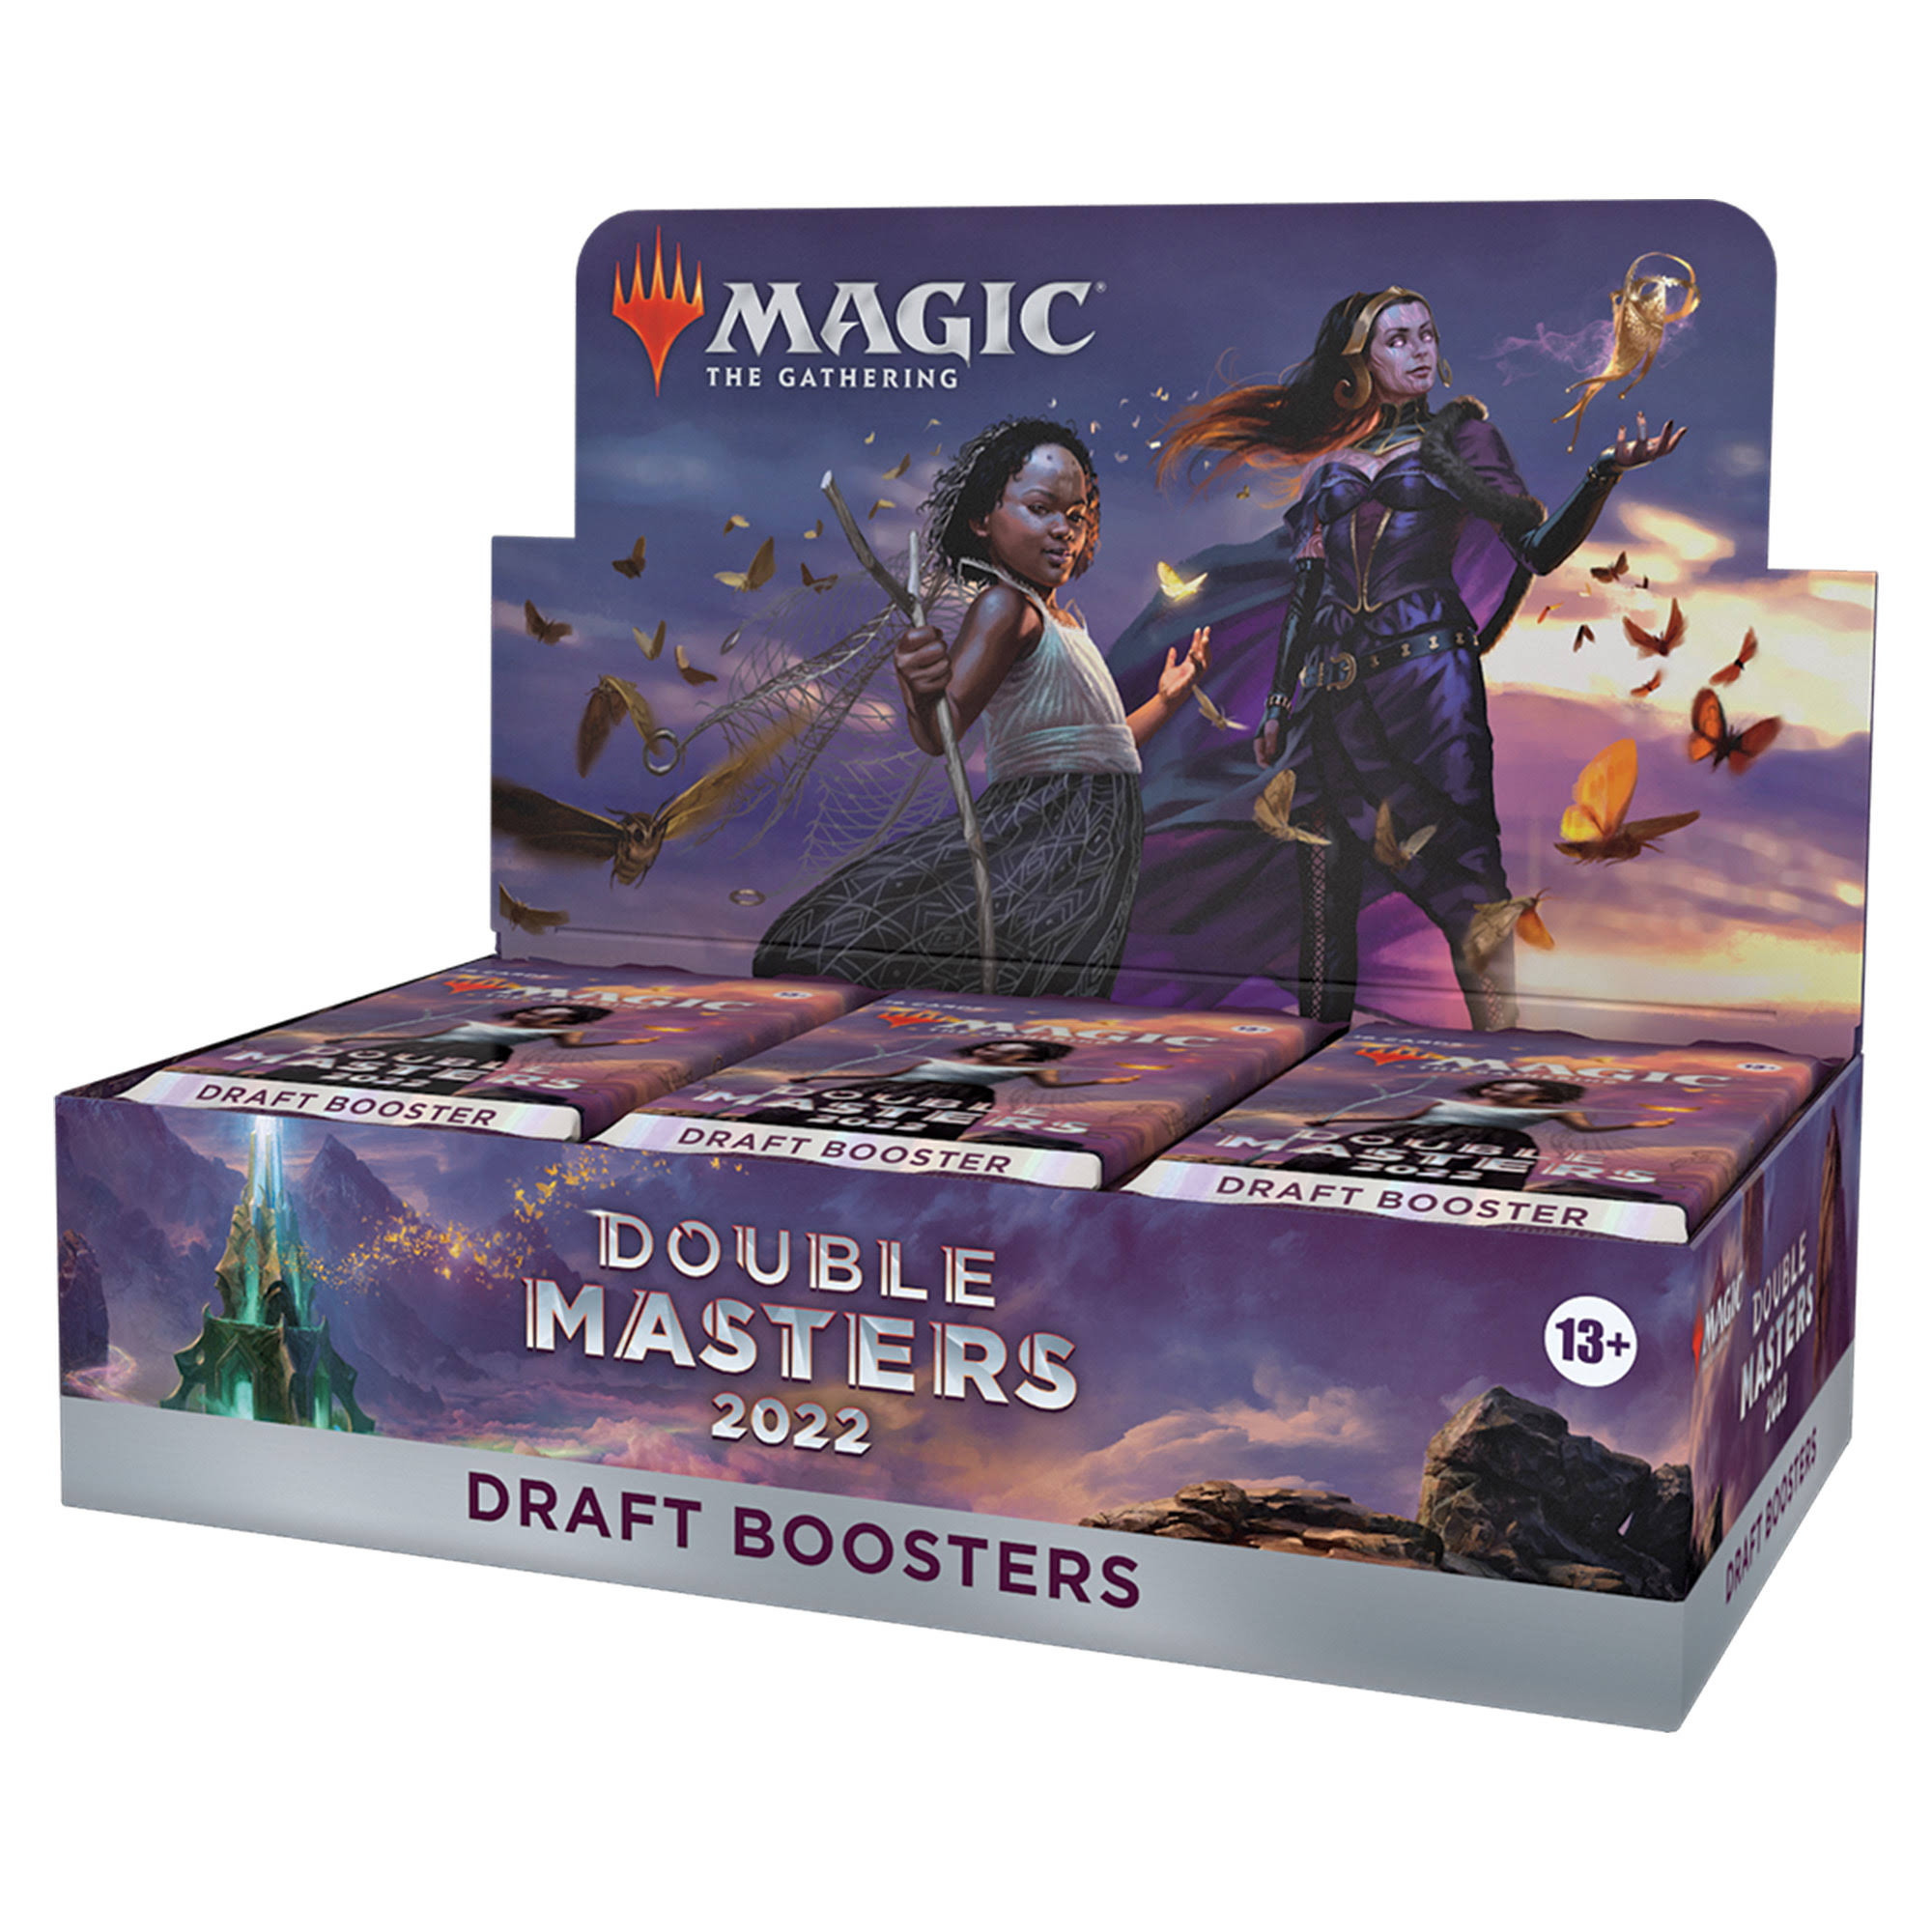 Double Masters 2022 Draft Booster Box - Magic The Gathering